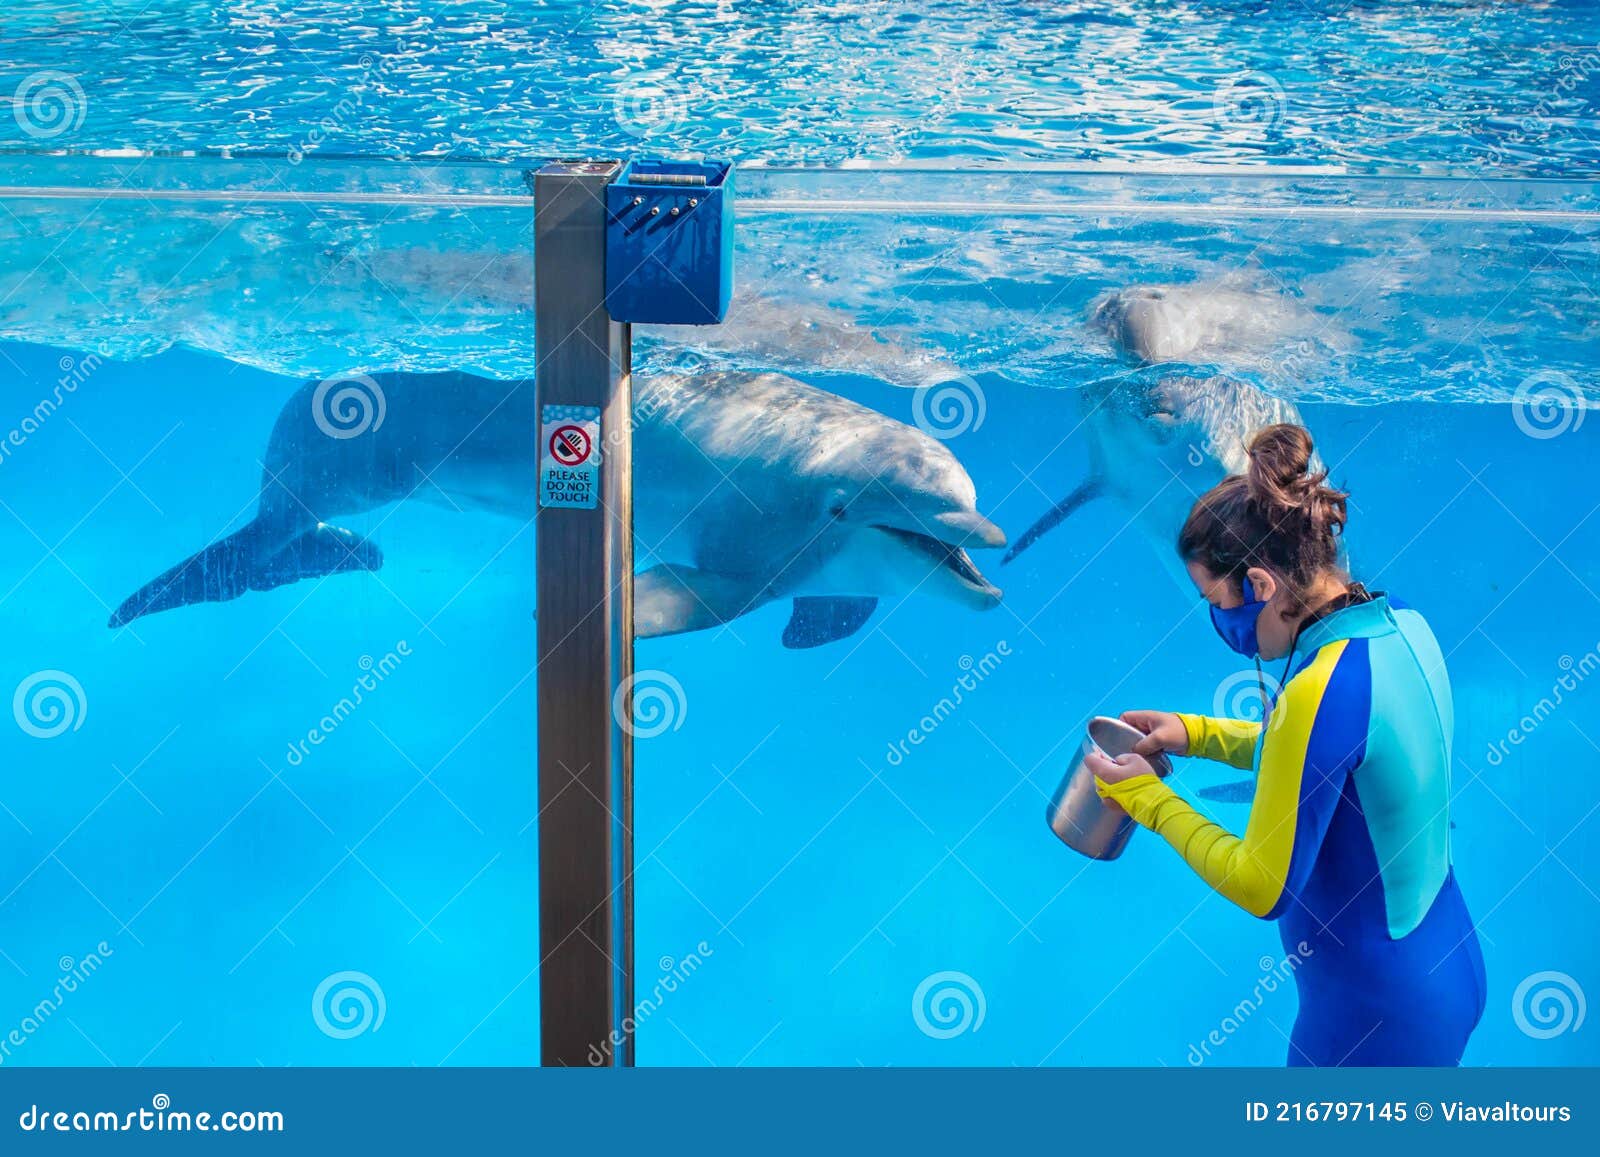 trainer-interacted-with-dolphin-in-dolphin-days-show-at-seaworld-10